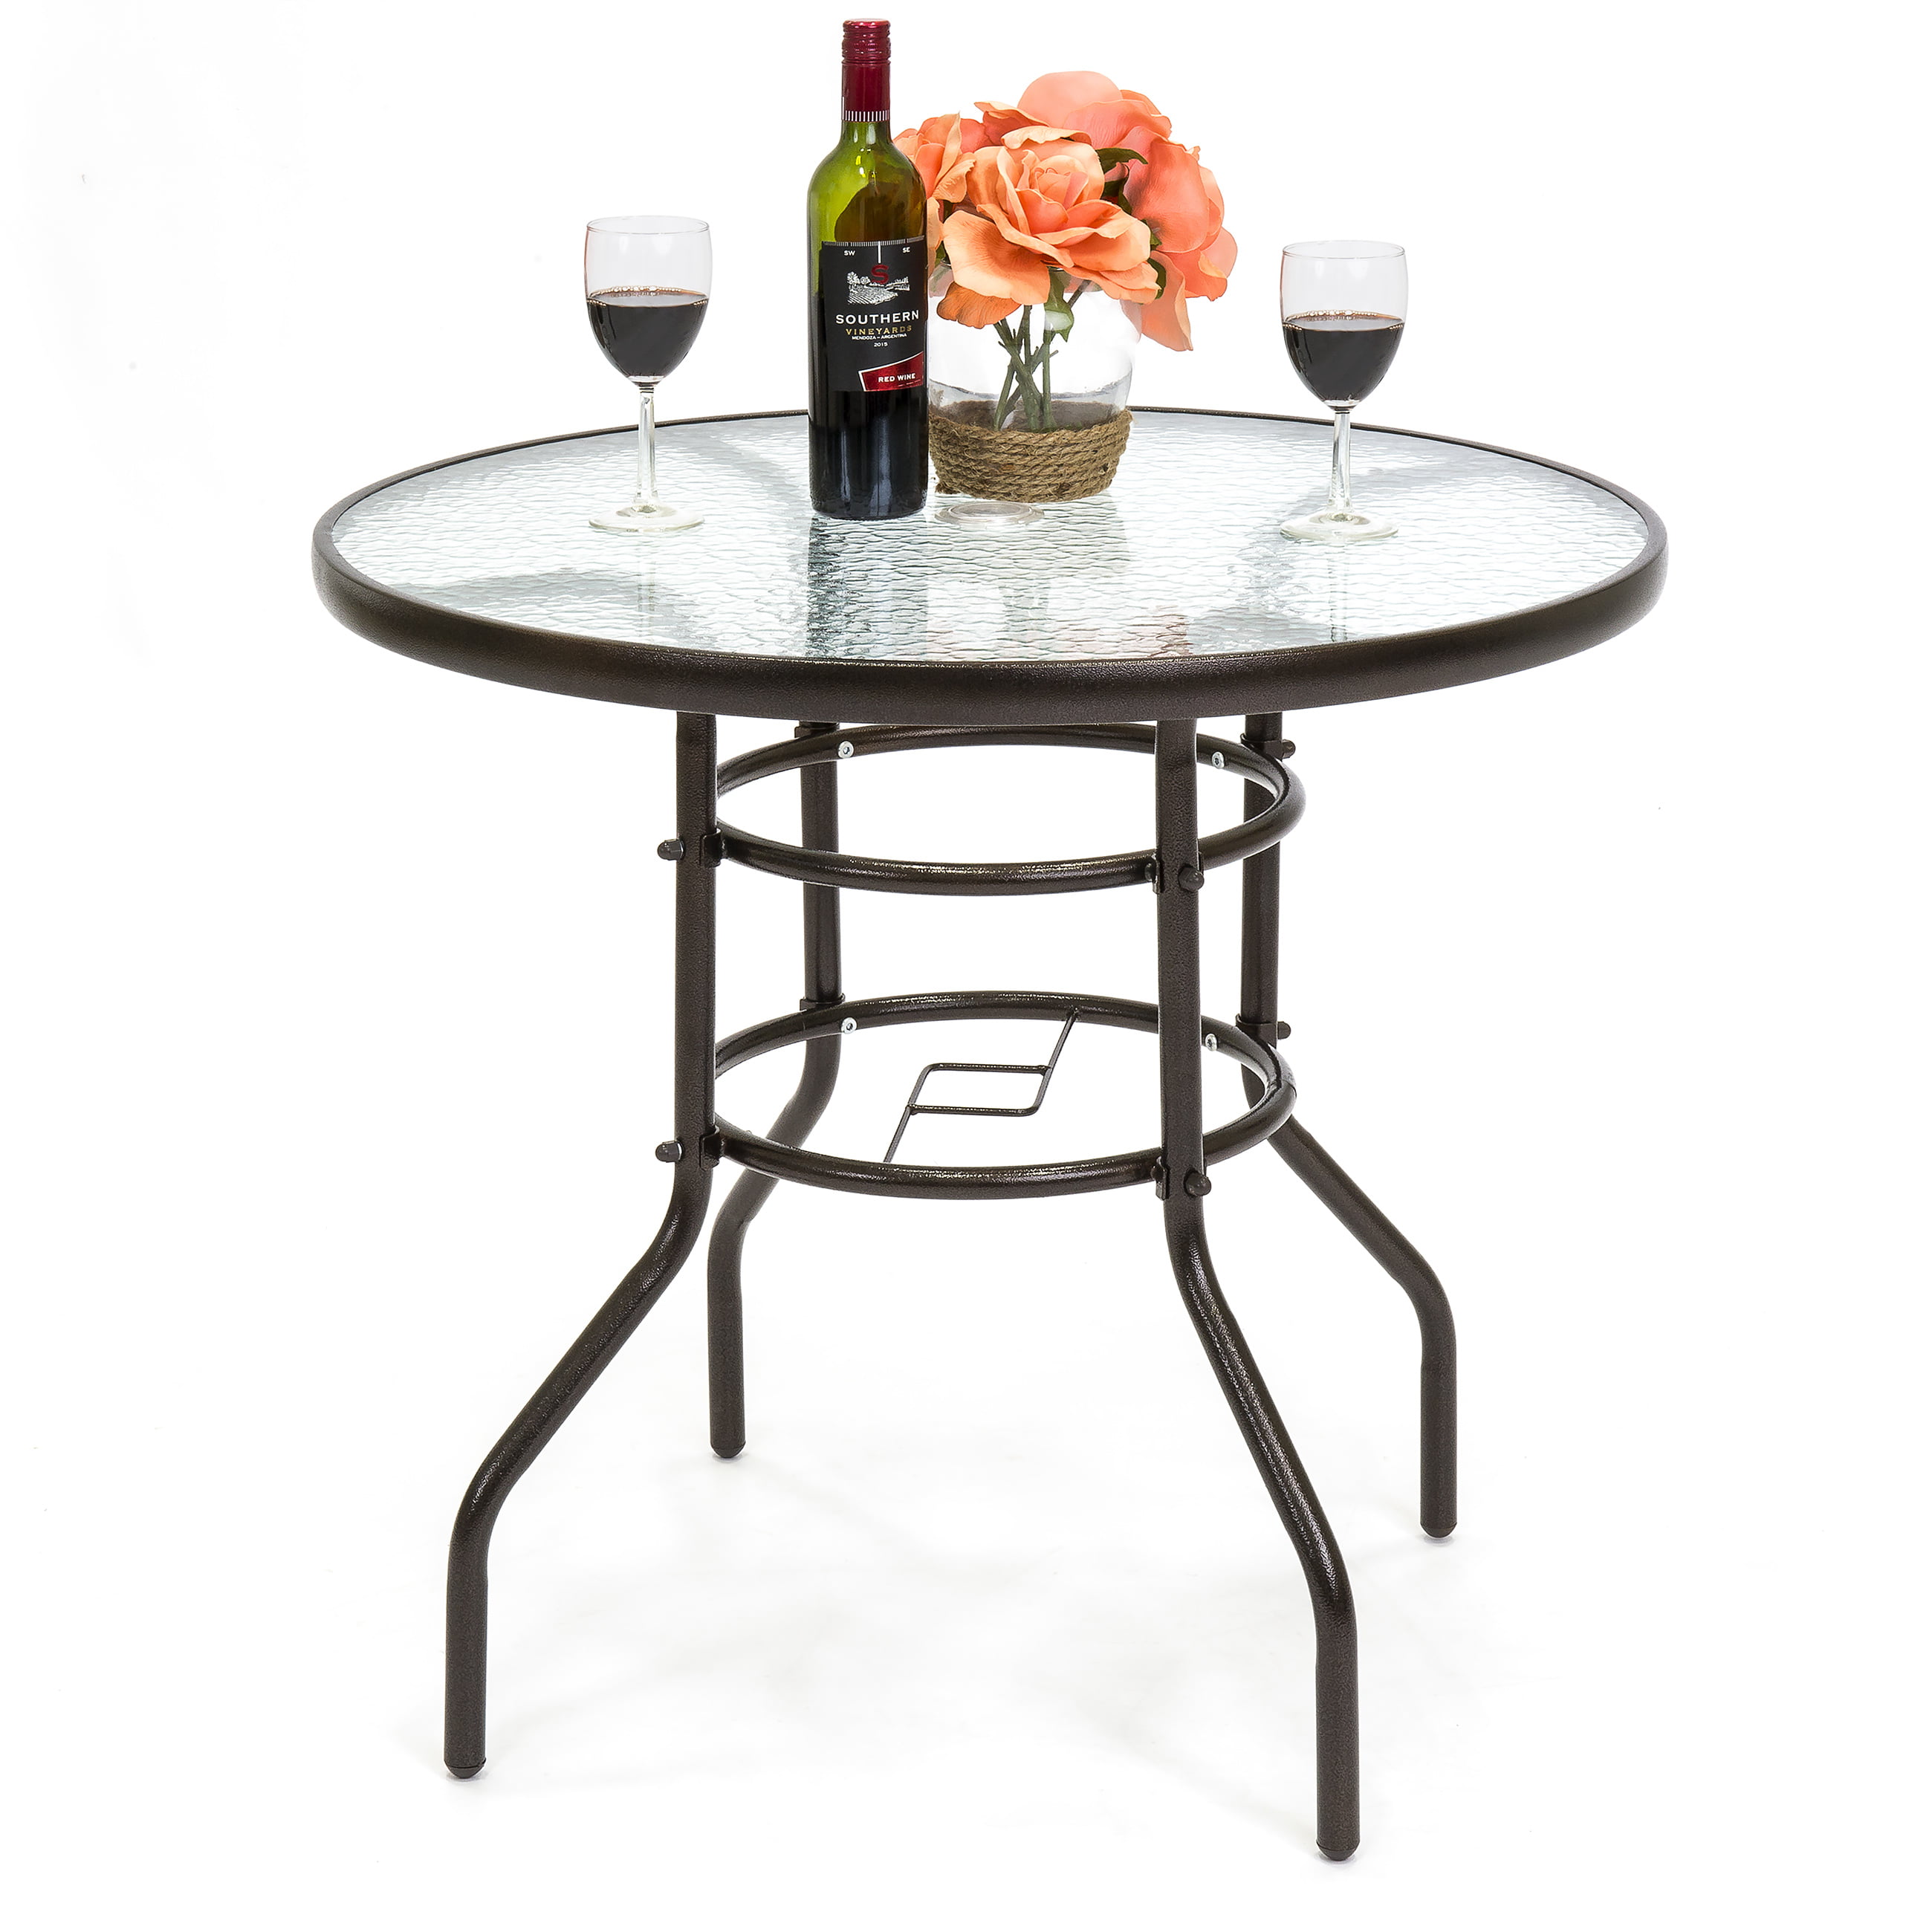 Bistro Table W Umbrella Hole, Round Outdoor Dining Table 23 58 In W X L With Umbrella Hole